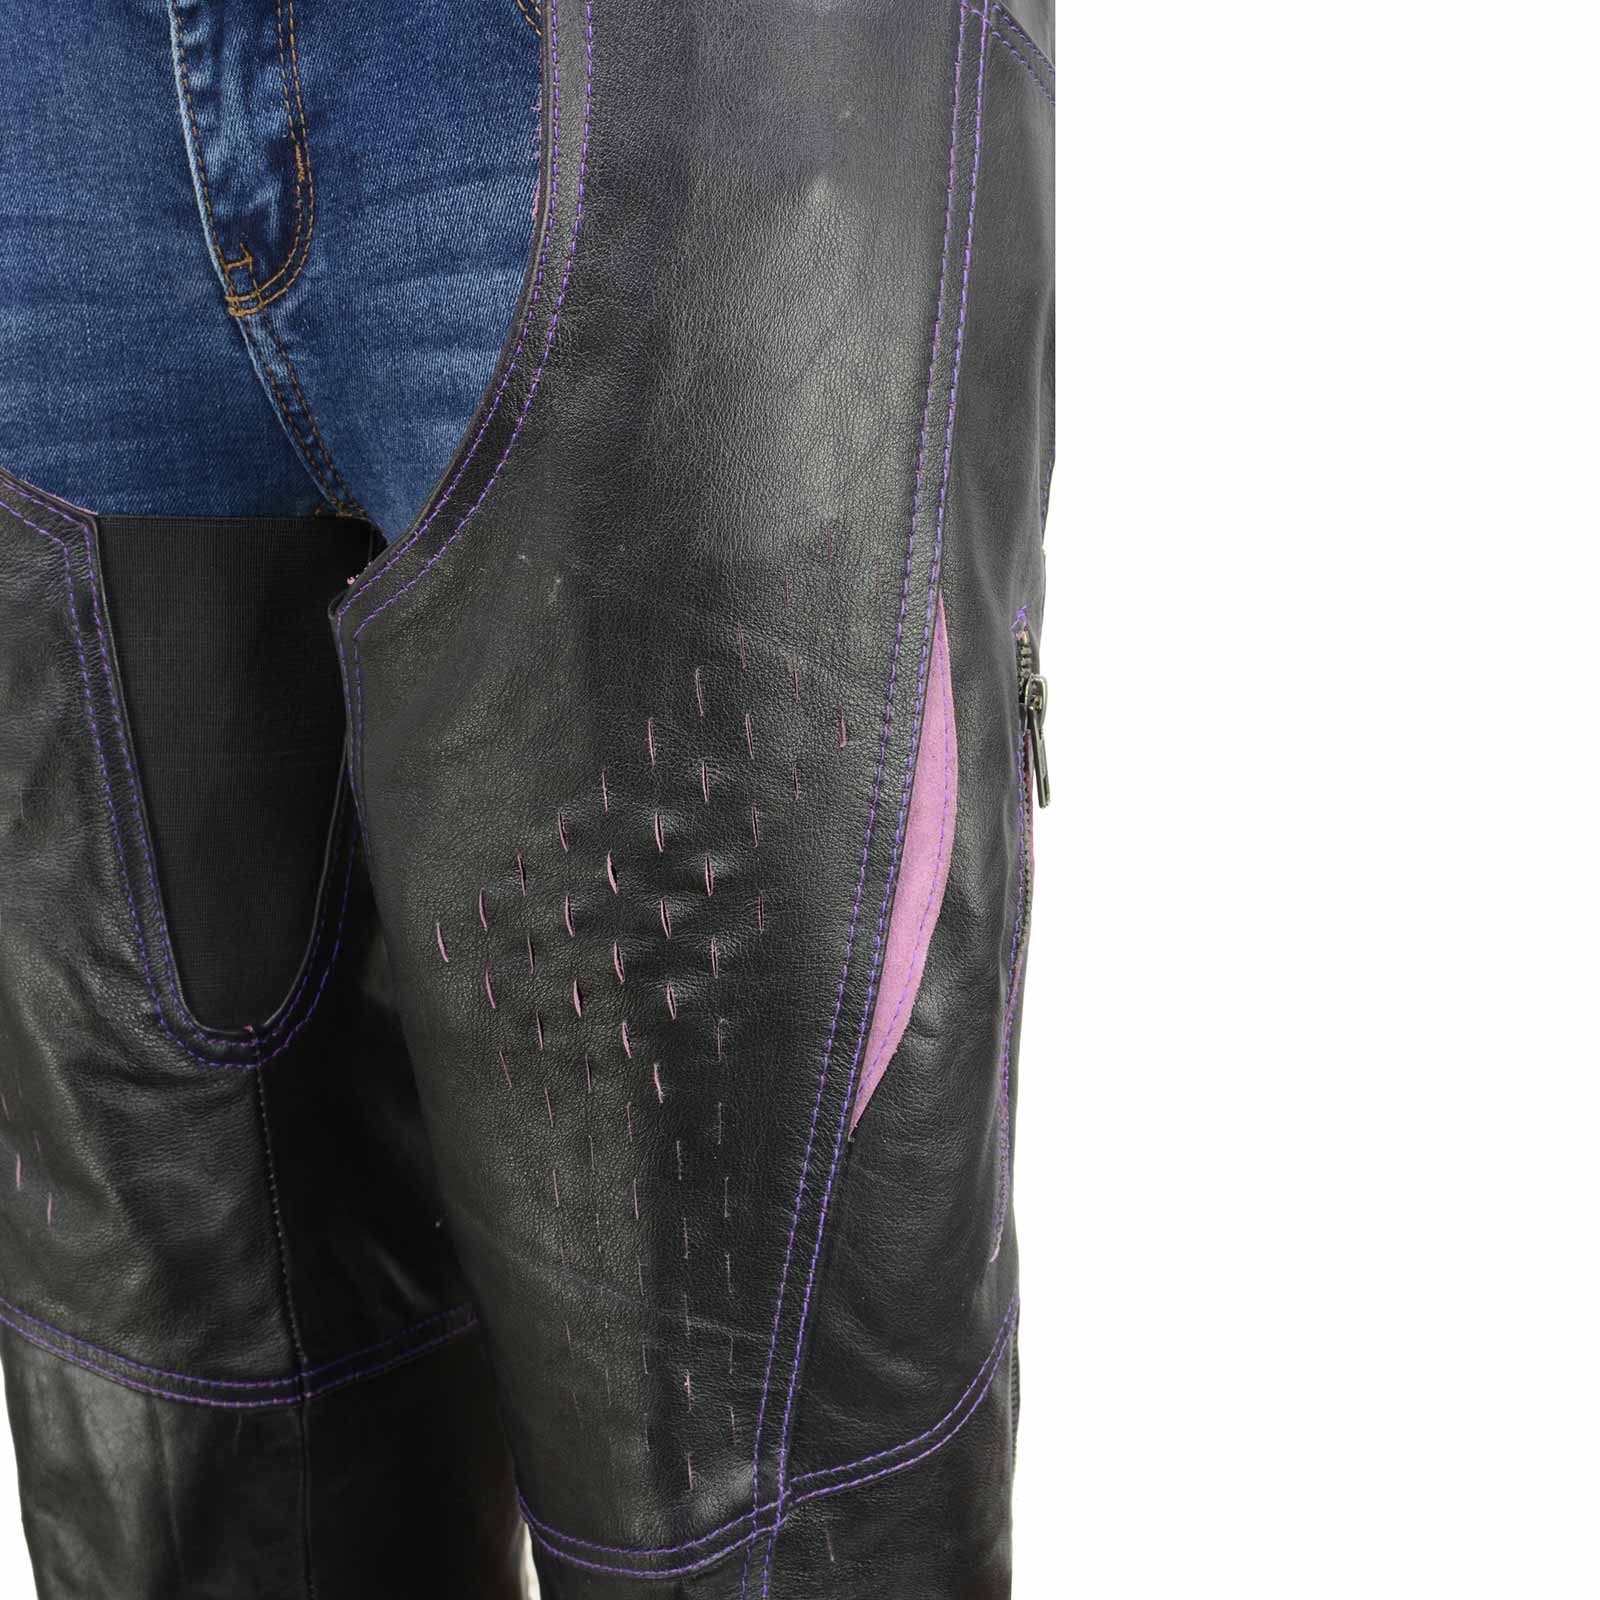 Milwaukee Leather Chaps for Women Black and Purple Premium Skin Laser Cut Accent Stitching Motorcycle Chap- MLL6525